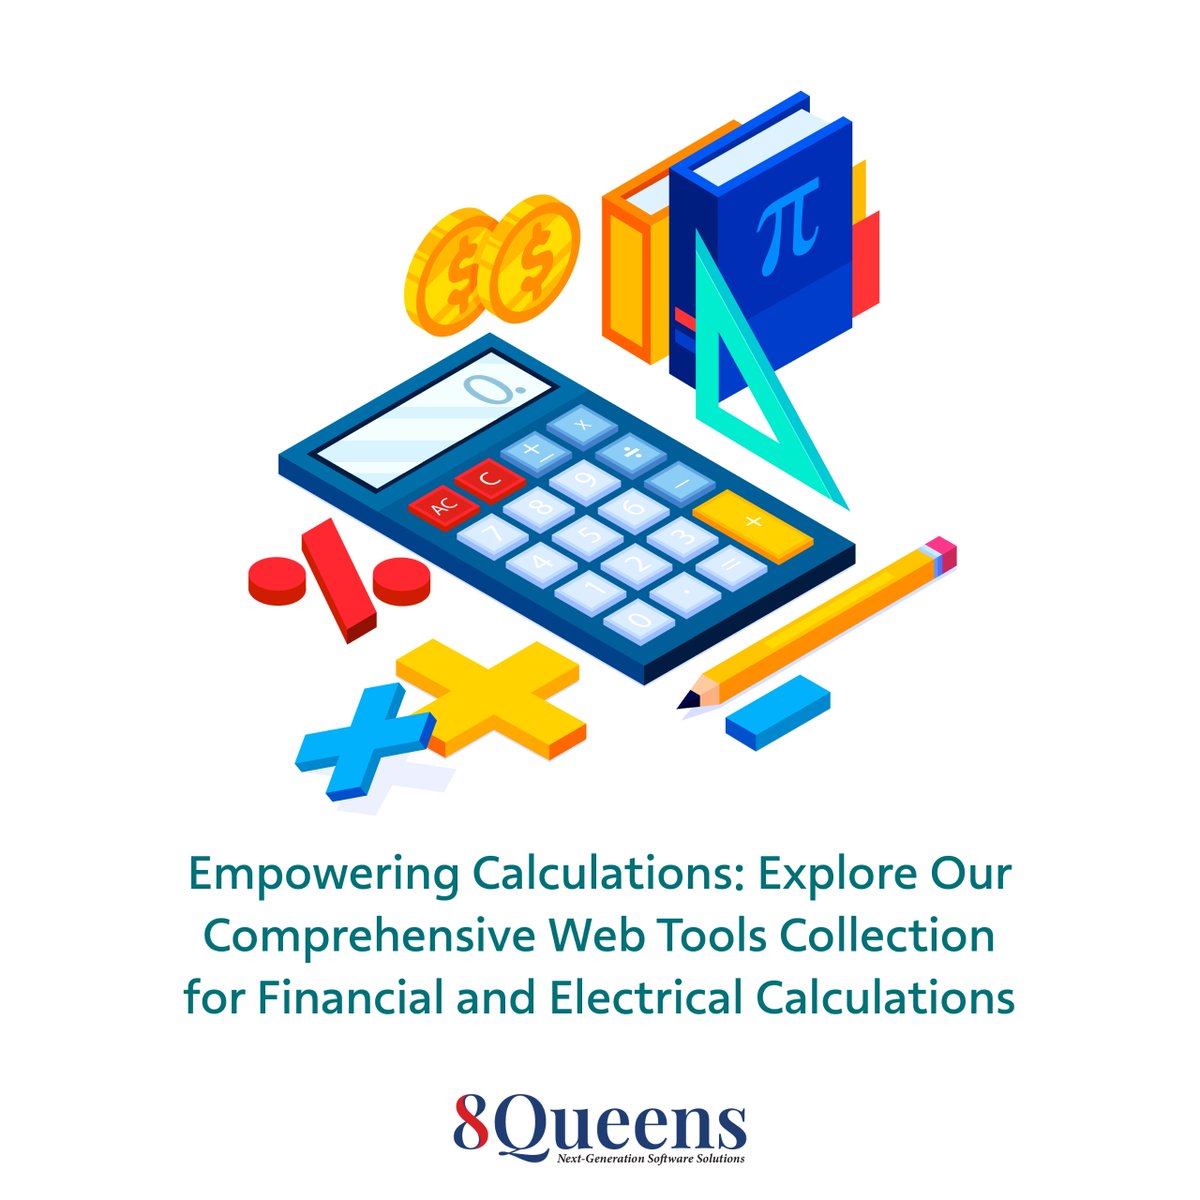 Explore the Power of Precision with Our Web Tools Collection 🛠️ by 8Queens Software Technologies Private Limited. From Financial Planning to Electrical Engineering, our Calculators are Tailored for Every Need!🚀

Website Link: webtoolscollection.com

#WebTools #FinanceTools